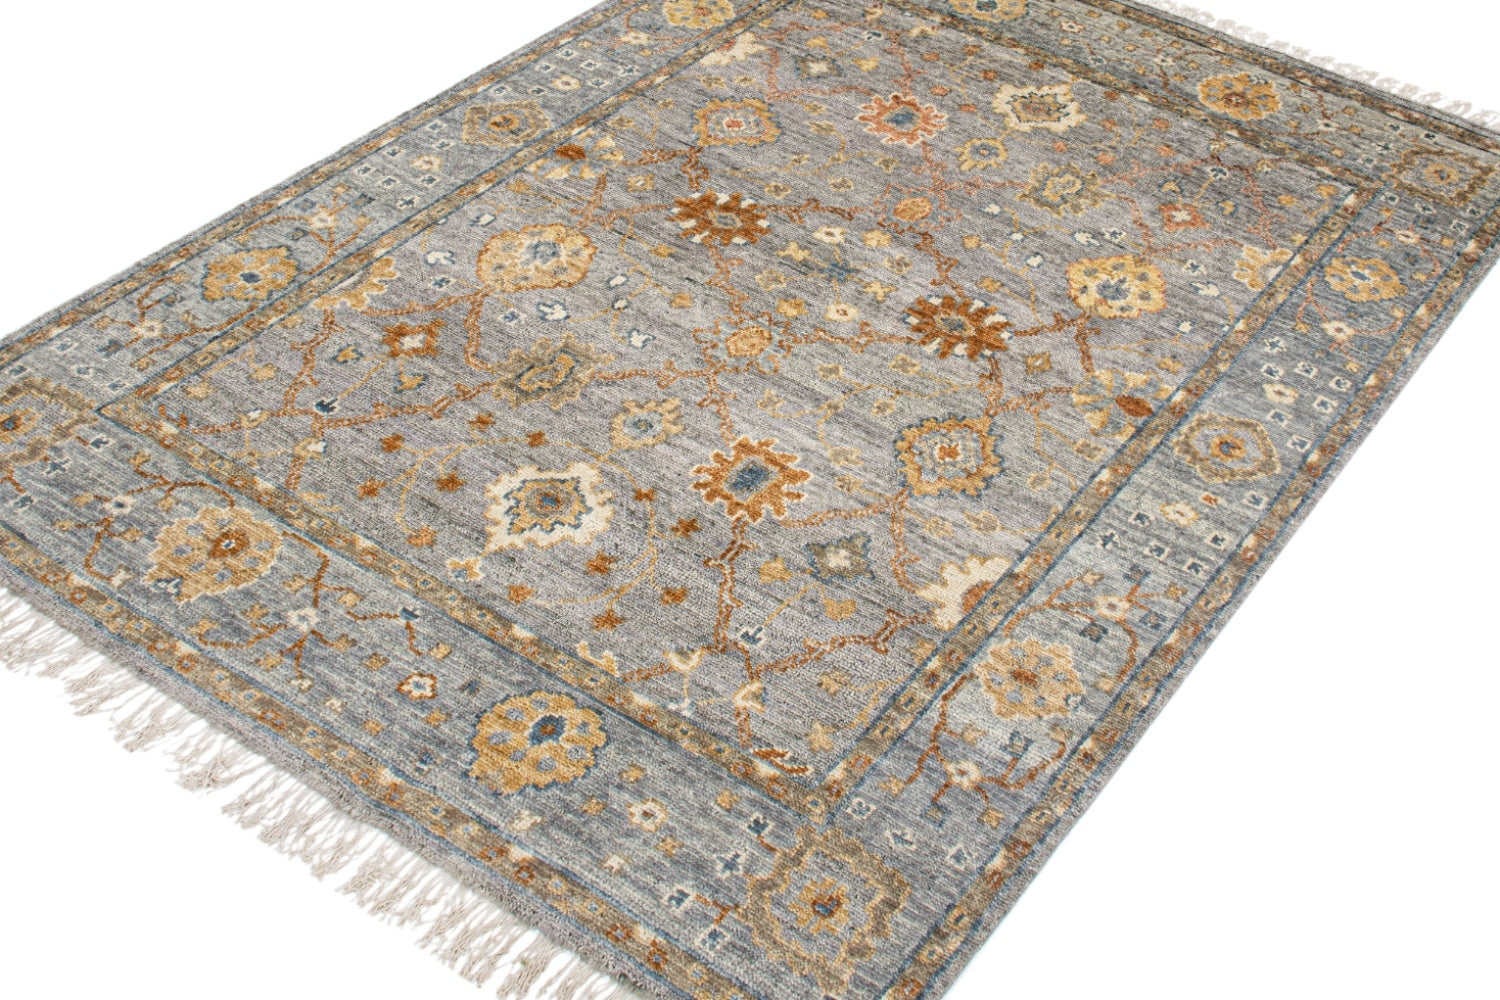 Sultanabad 3 Handwoven Traditional Rug, J72596